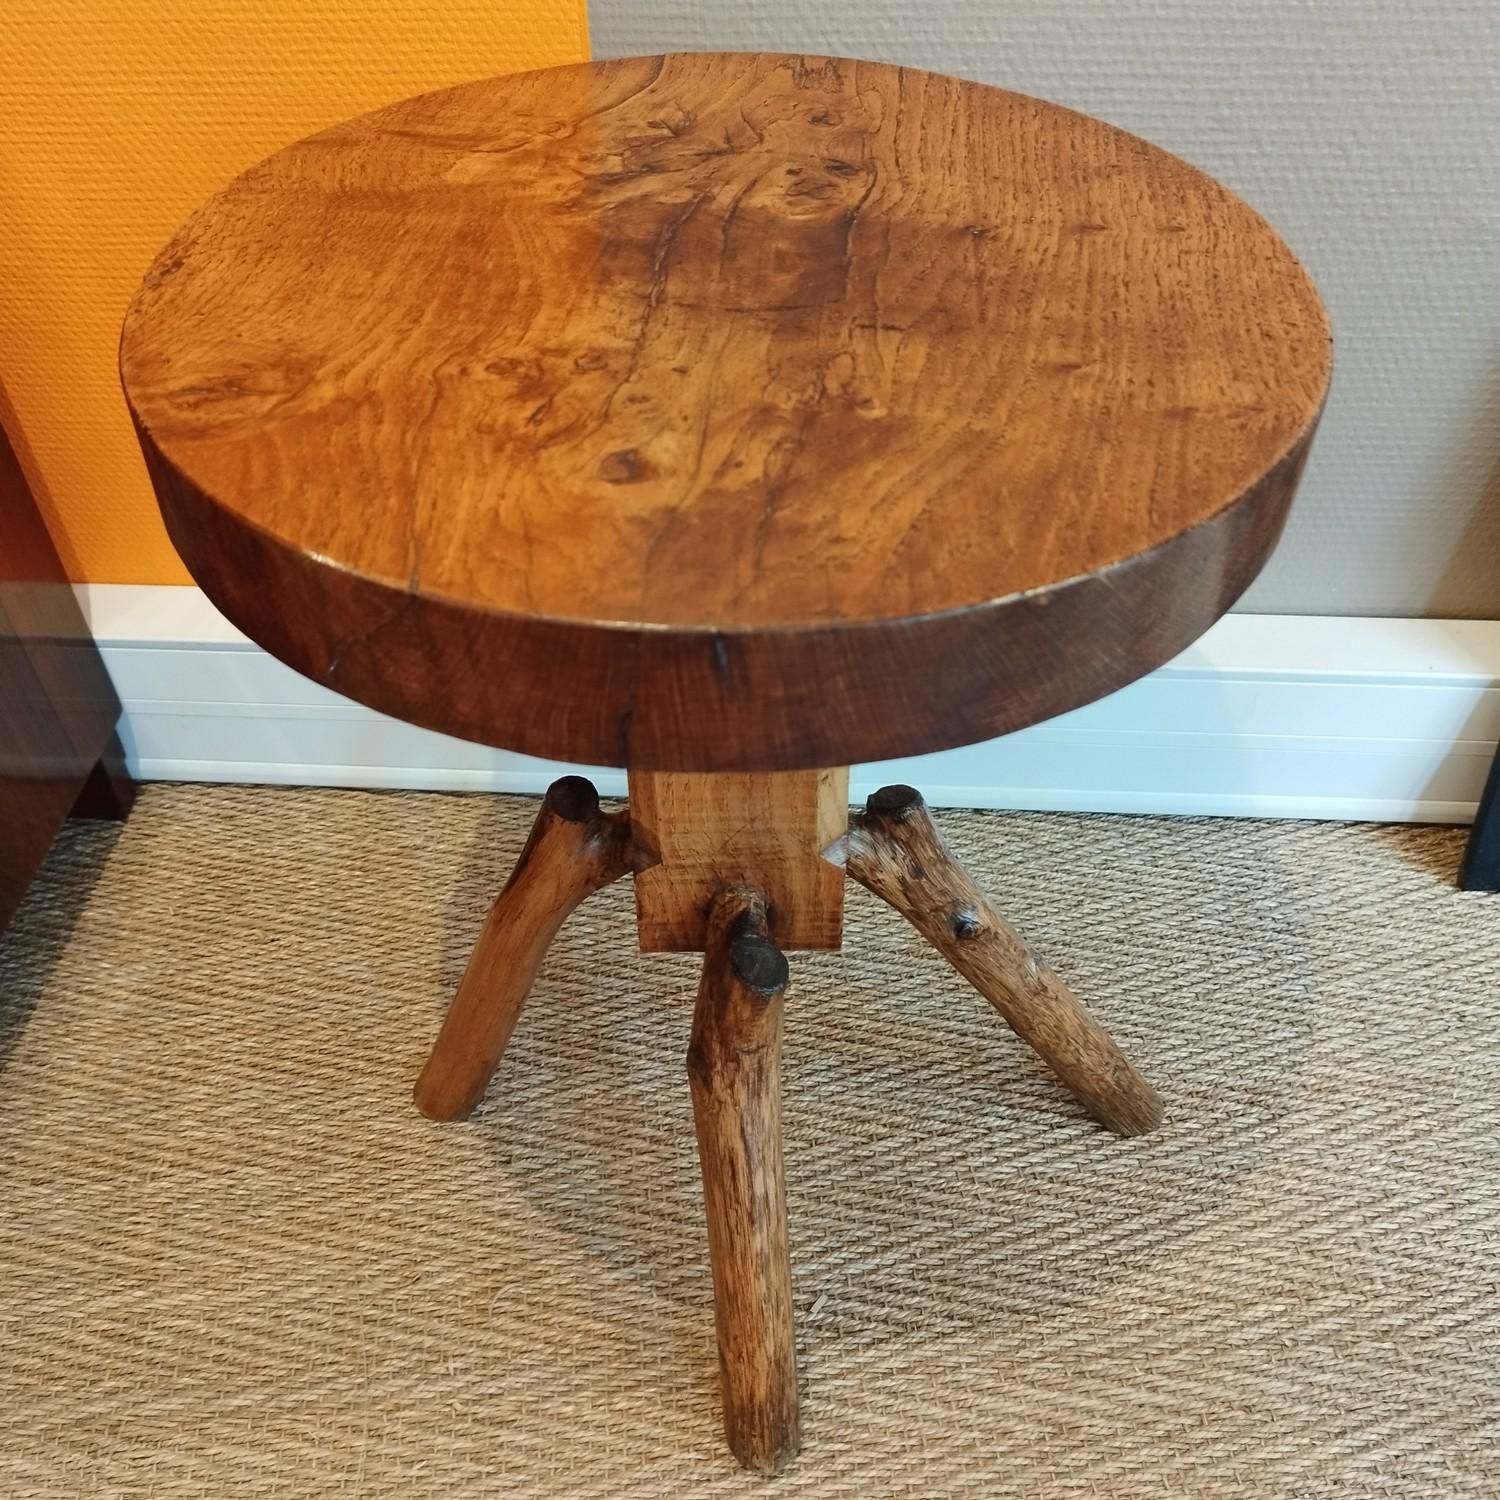 Small solid oak side table, that can also be used as a stool. Very thick 6cm top, legs made out of branches inserted into a rectangular block.
Do not hesitate to ask me for a shipping quote.